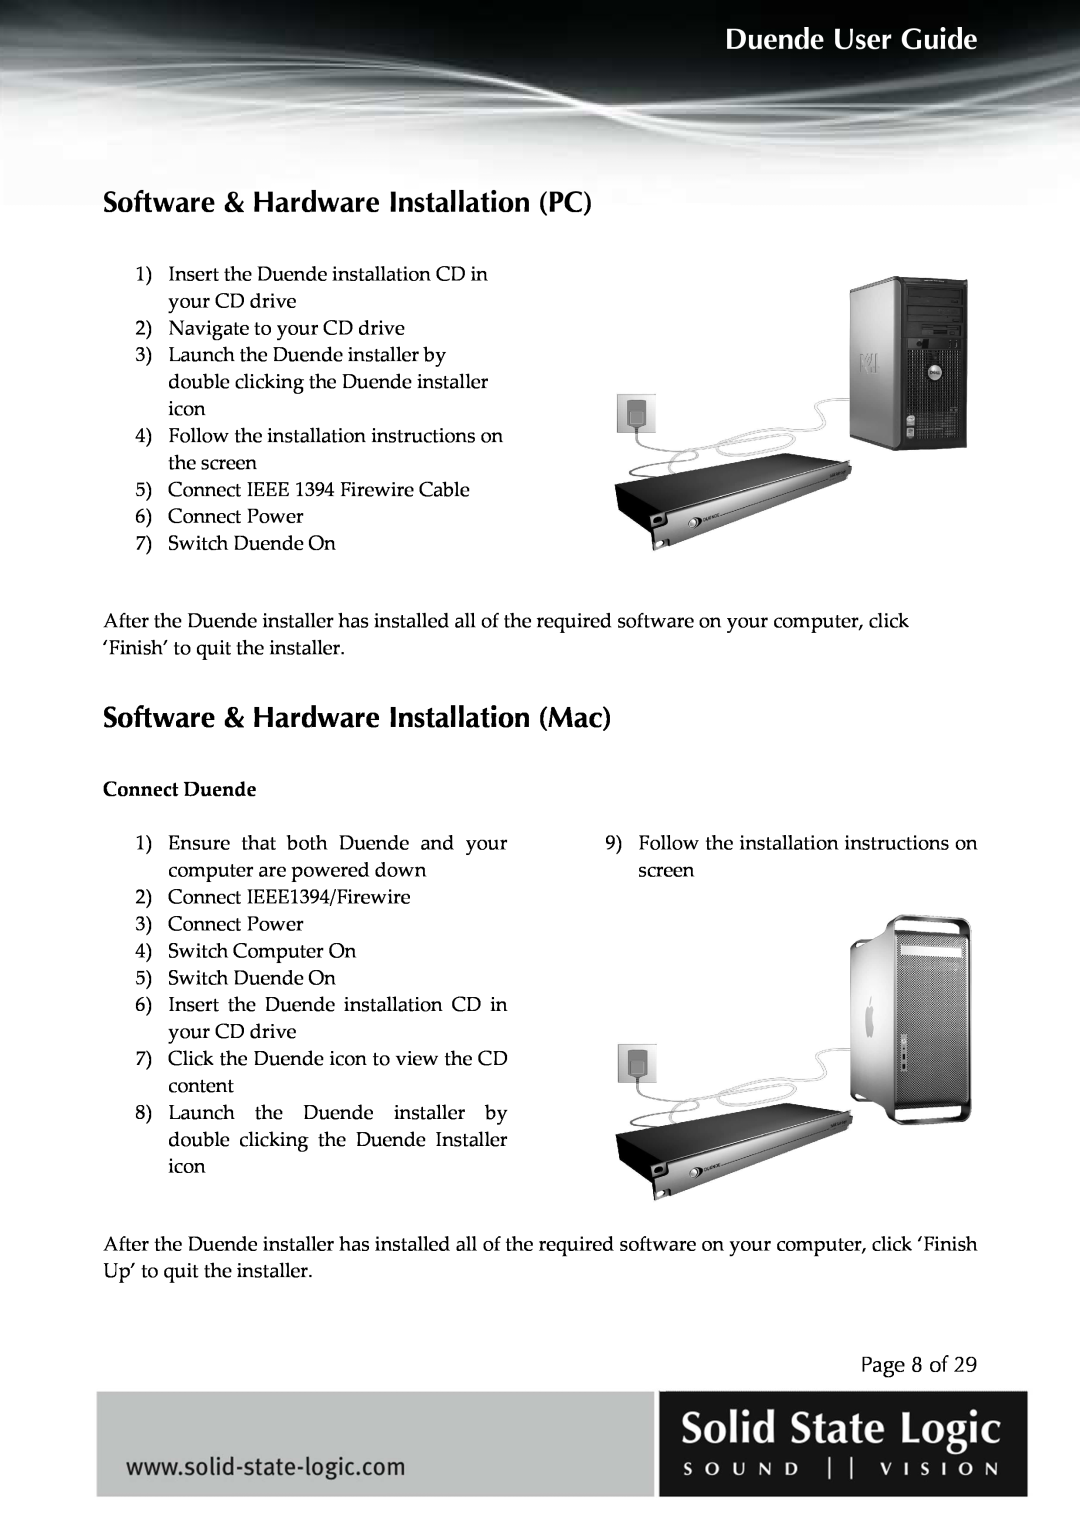 Solid State Logic DUENDE manual Software & Hardware Installation PC, Software & Hardware Installation Mac, Page 8 of 